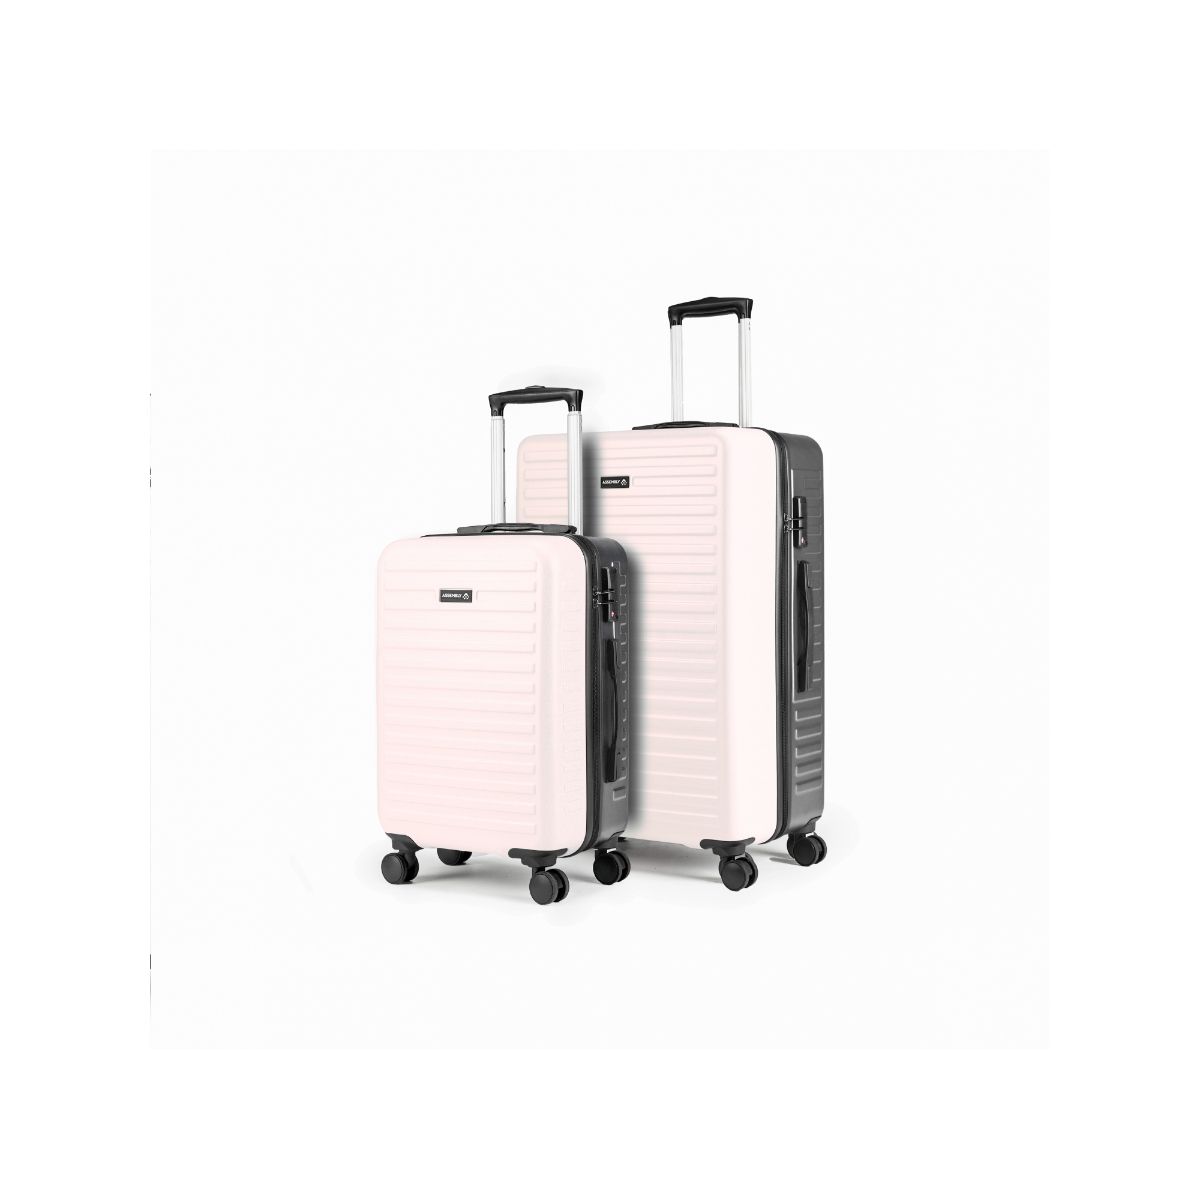 it luggage St Tropez Deux Polycarbonate Hardsided Suitcase Expandable  Combo Large  Cabin Travel Bags8 Wheel Trolley16205508Set of 2  Champagne 74cm 54cm Trolley Bags  Shop online at low price for it